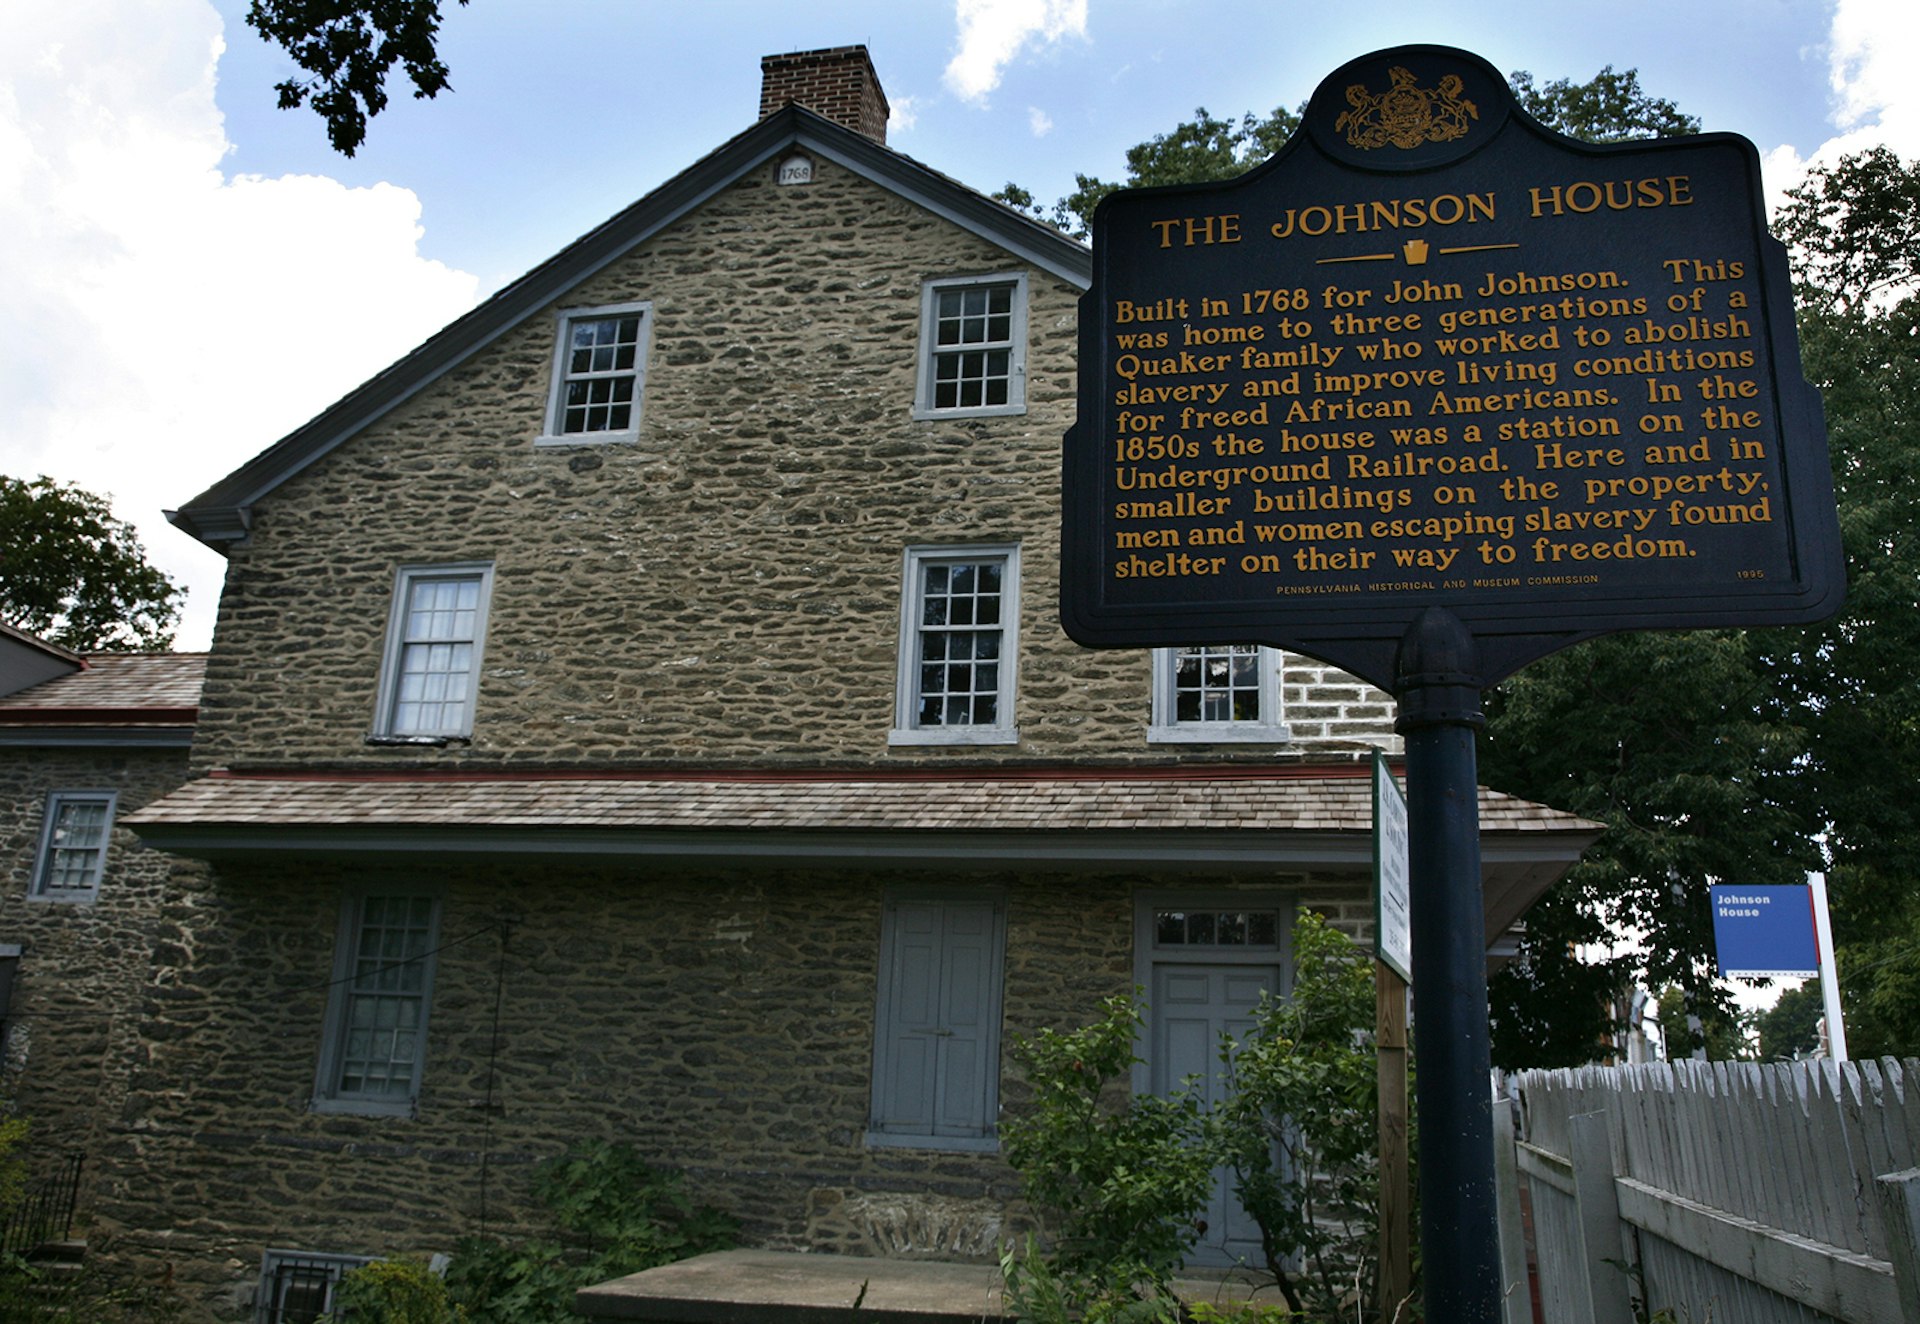 An 18th -century stone home in Philadelphia with a historic marker sign in front of it